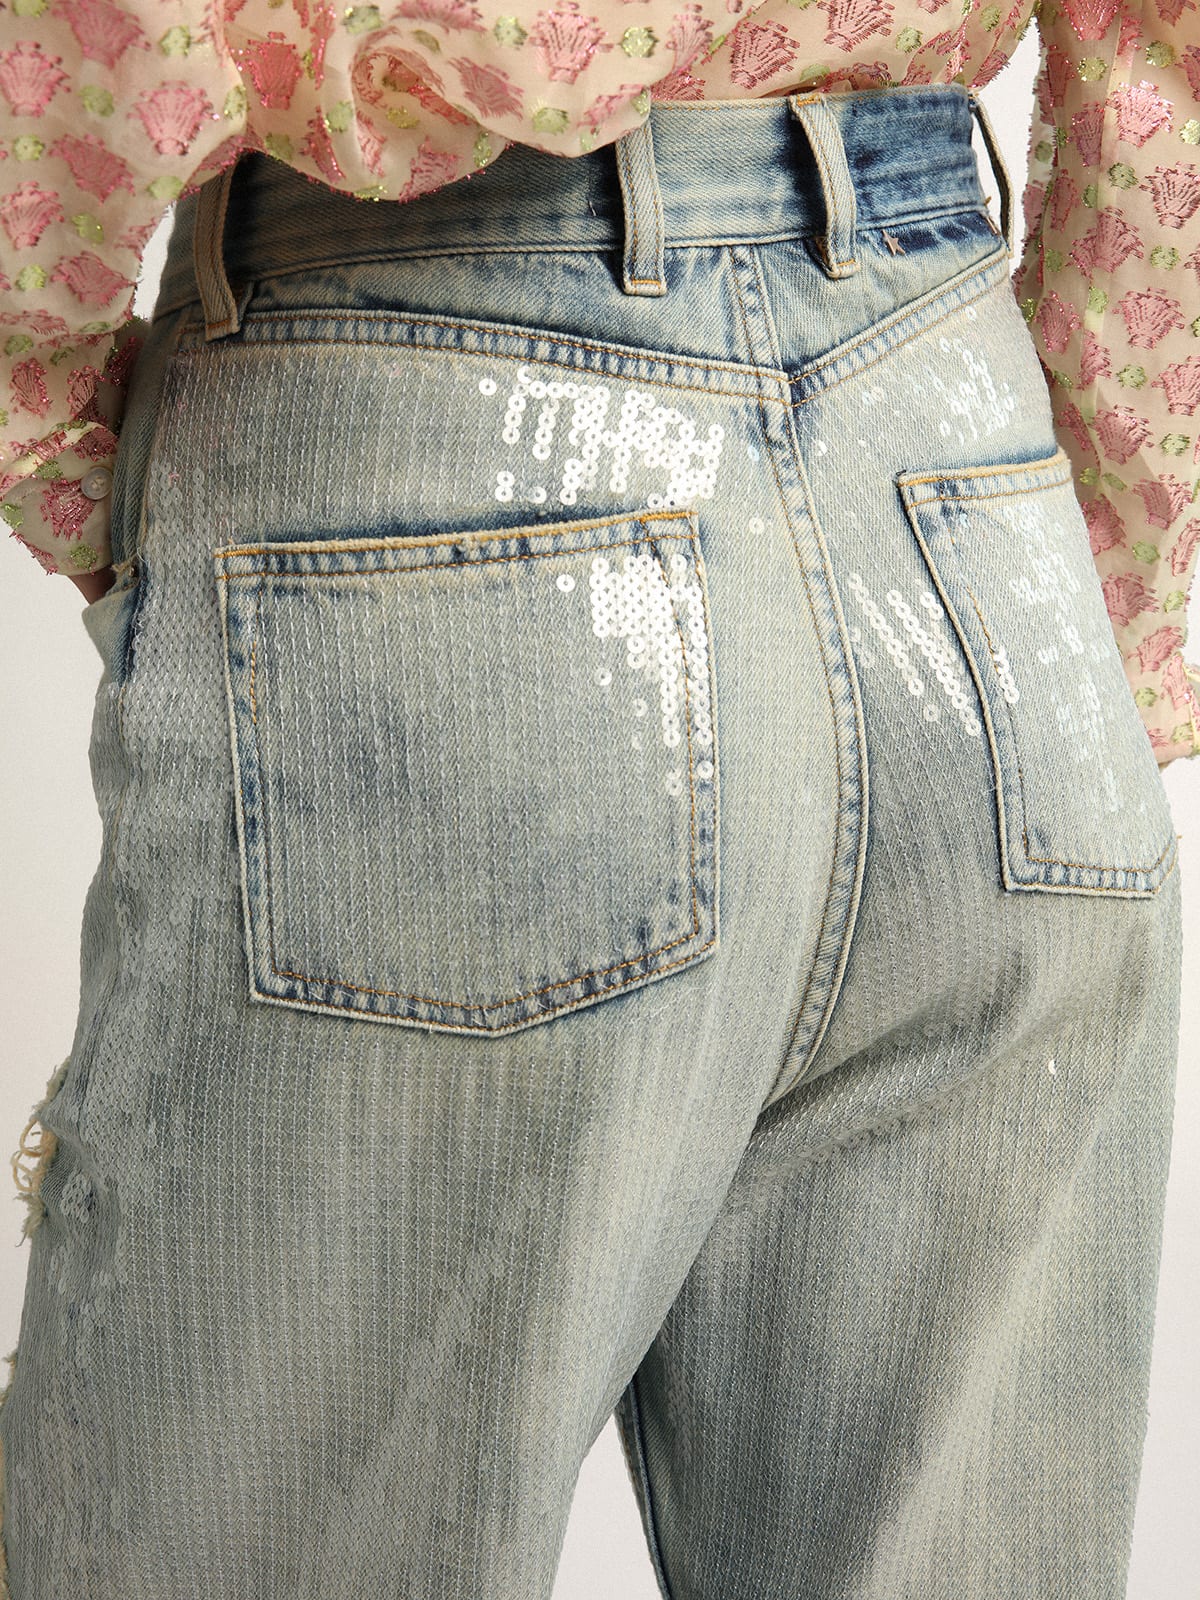 Golden Goose - Journey Collection jeans in distressed-effect light blue denim with all-over sequins in 